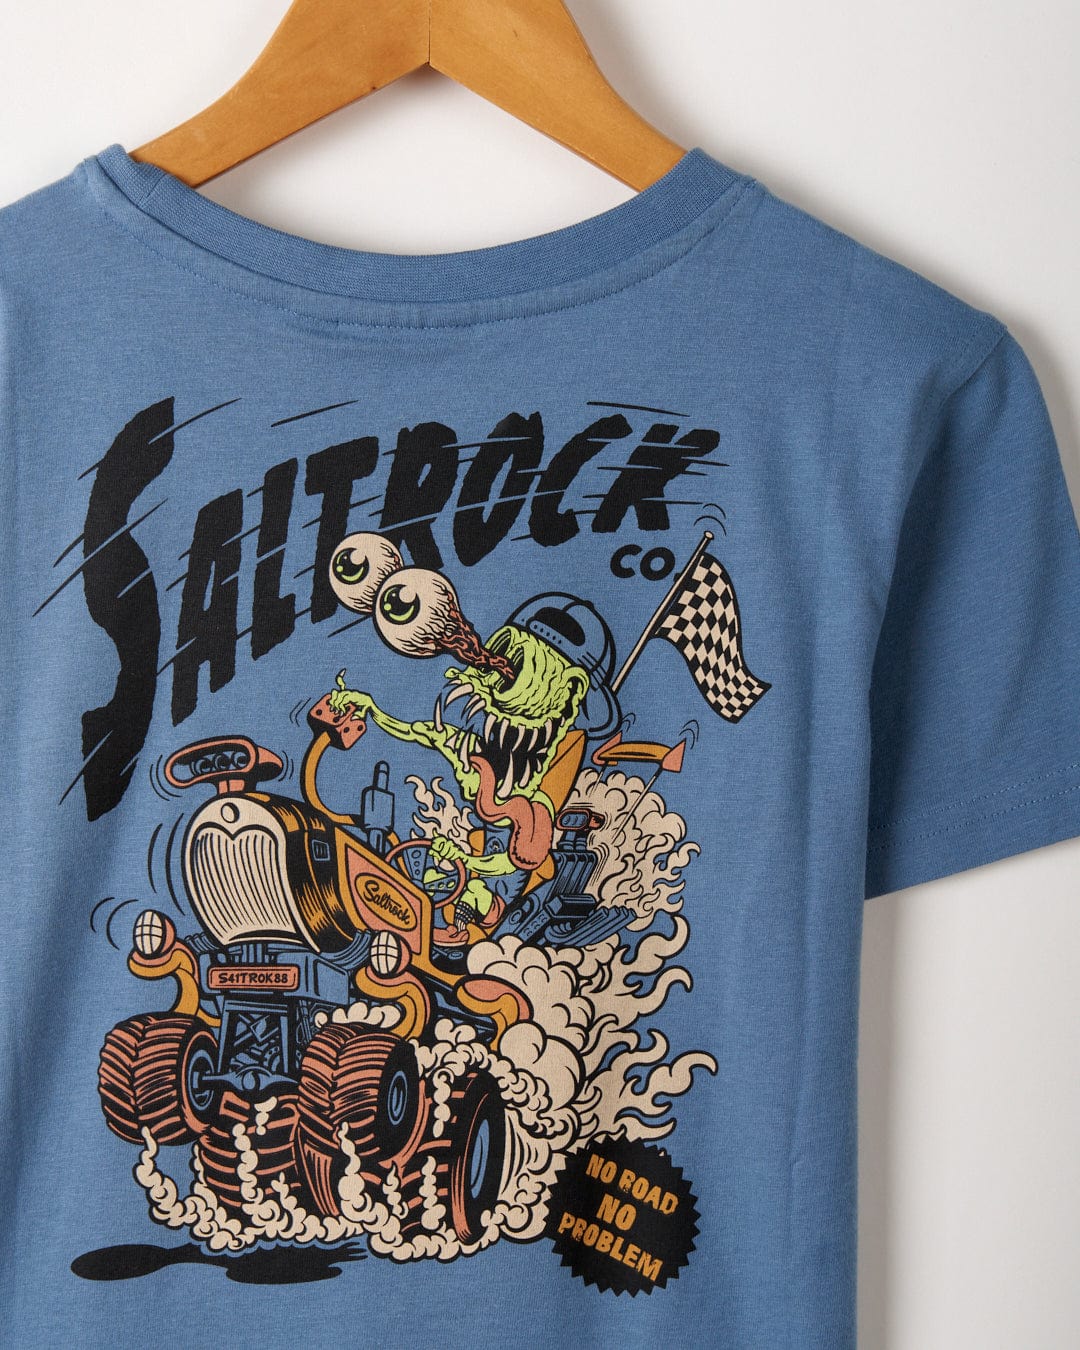 A "No Road No Problem" Kids Short Sleeve T-Shirt in Blue from Saltrock.